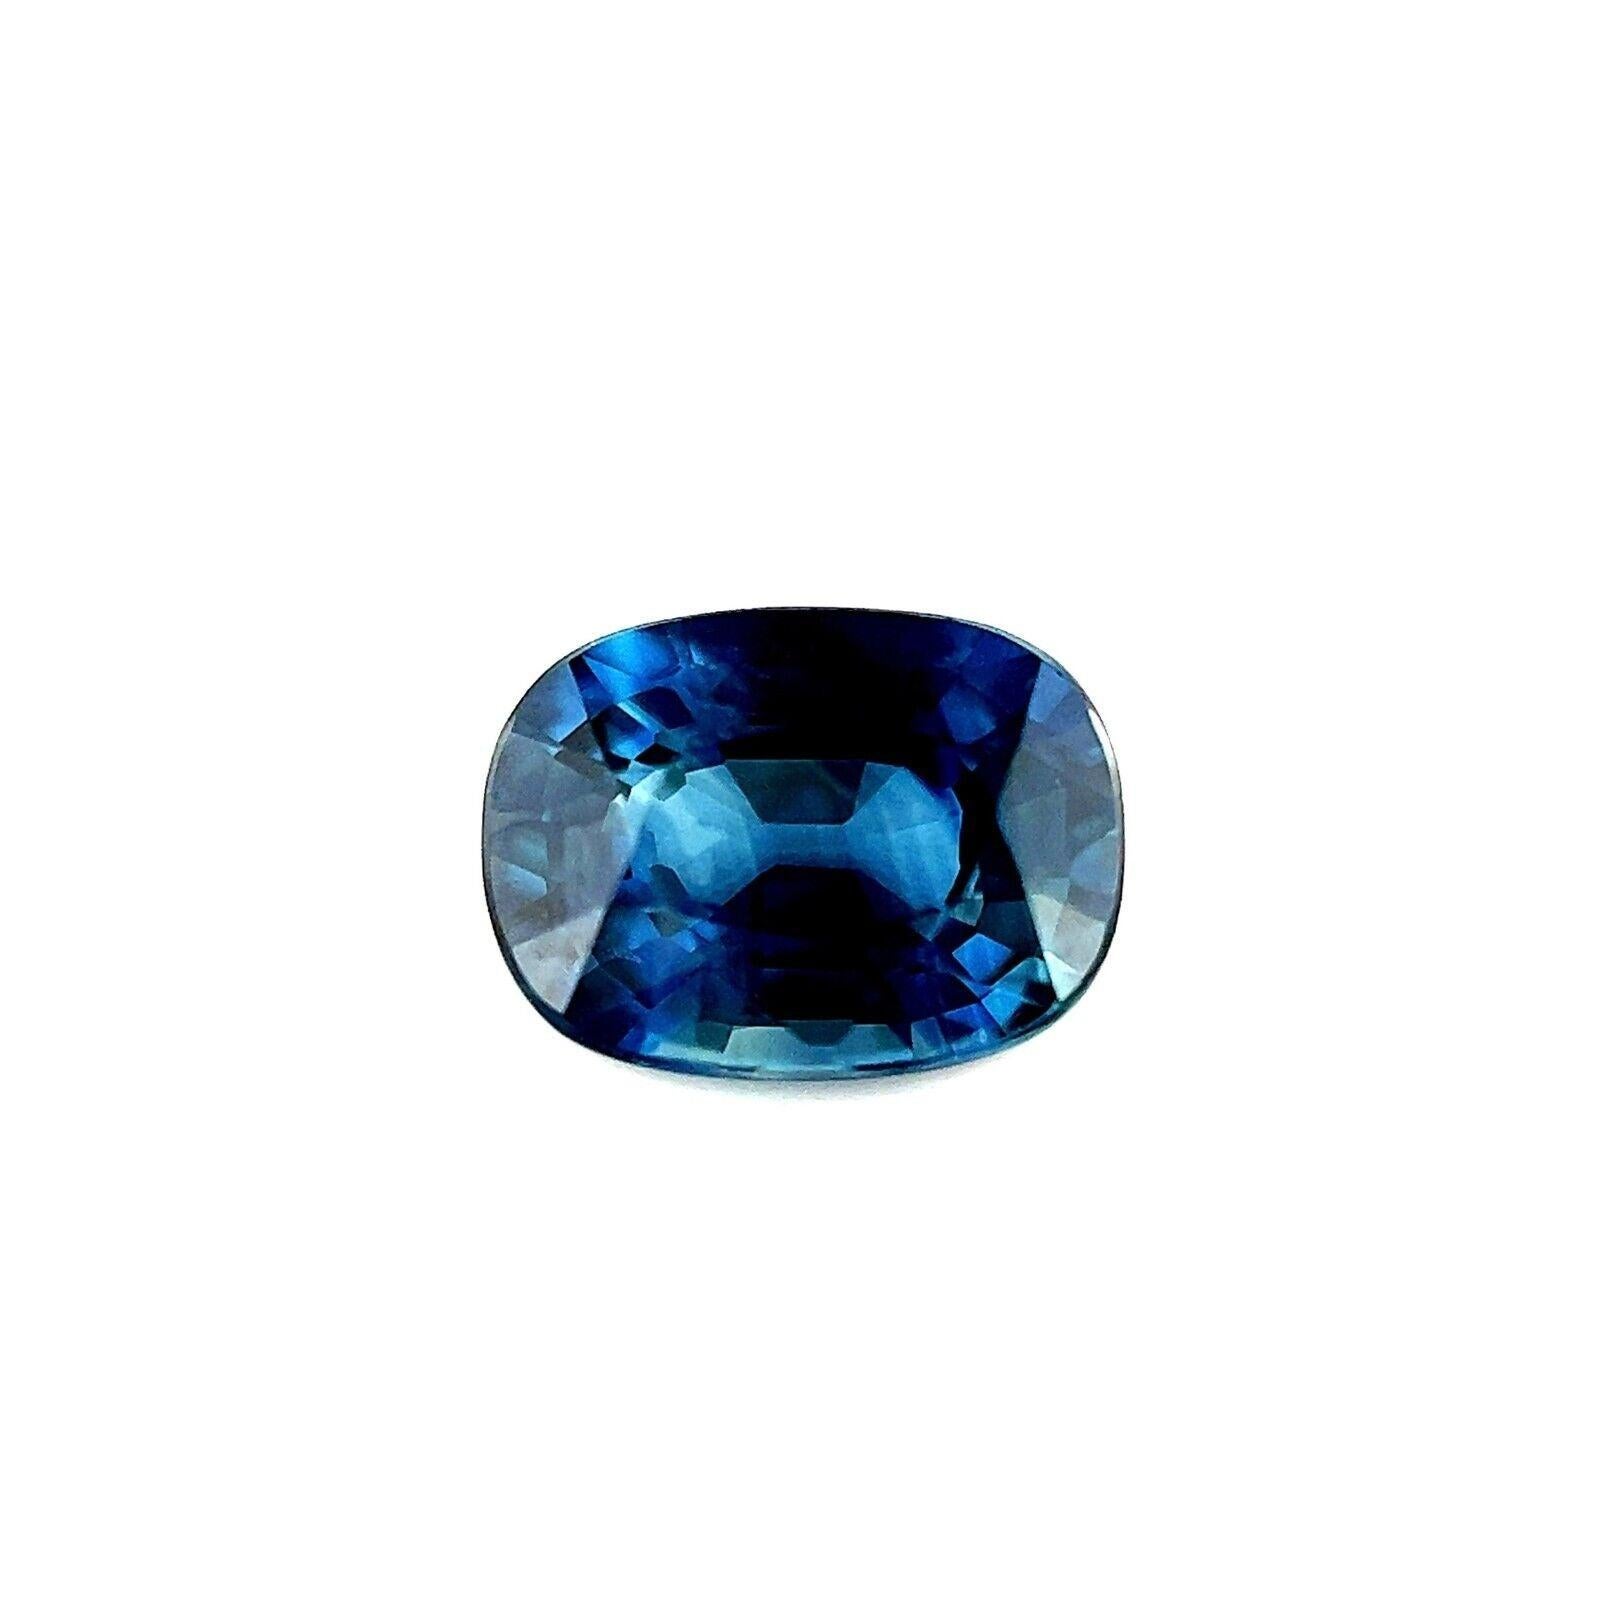 Natural Green Blue Teal Sapphire 0.87ct Australian Cushion Cut Gem 6.3x4.6mm

Natural Australian Blue Sapphire Gemstone.
0.87 Carat with a blue colour and excellent clarity, practically flawless.
Also has an excellent cushion cut measuring 6.3 x 4.6